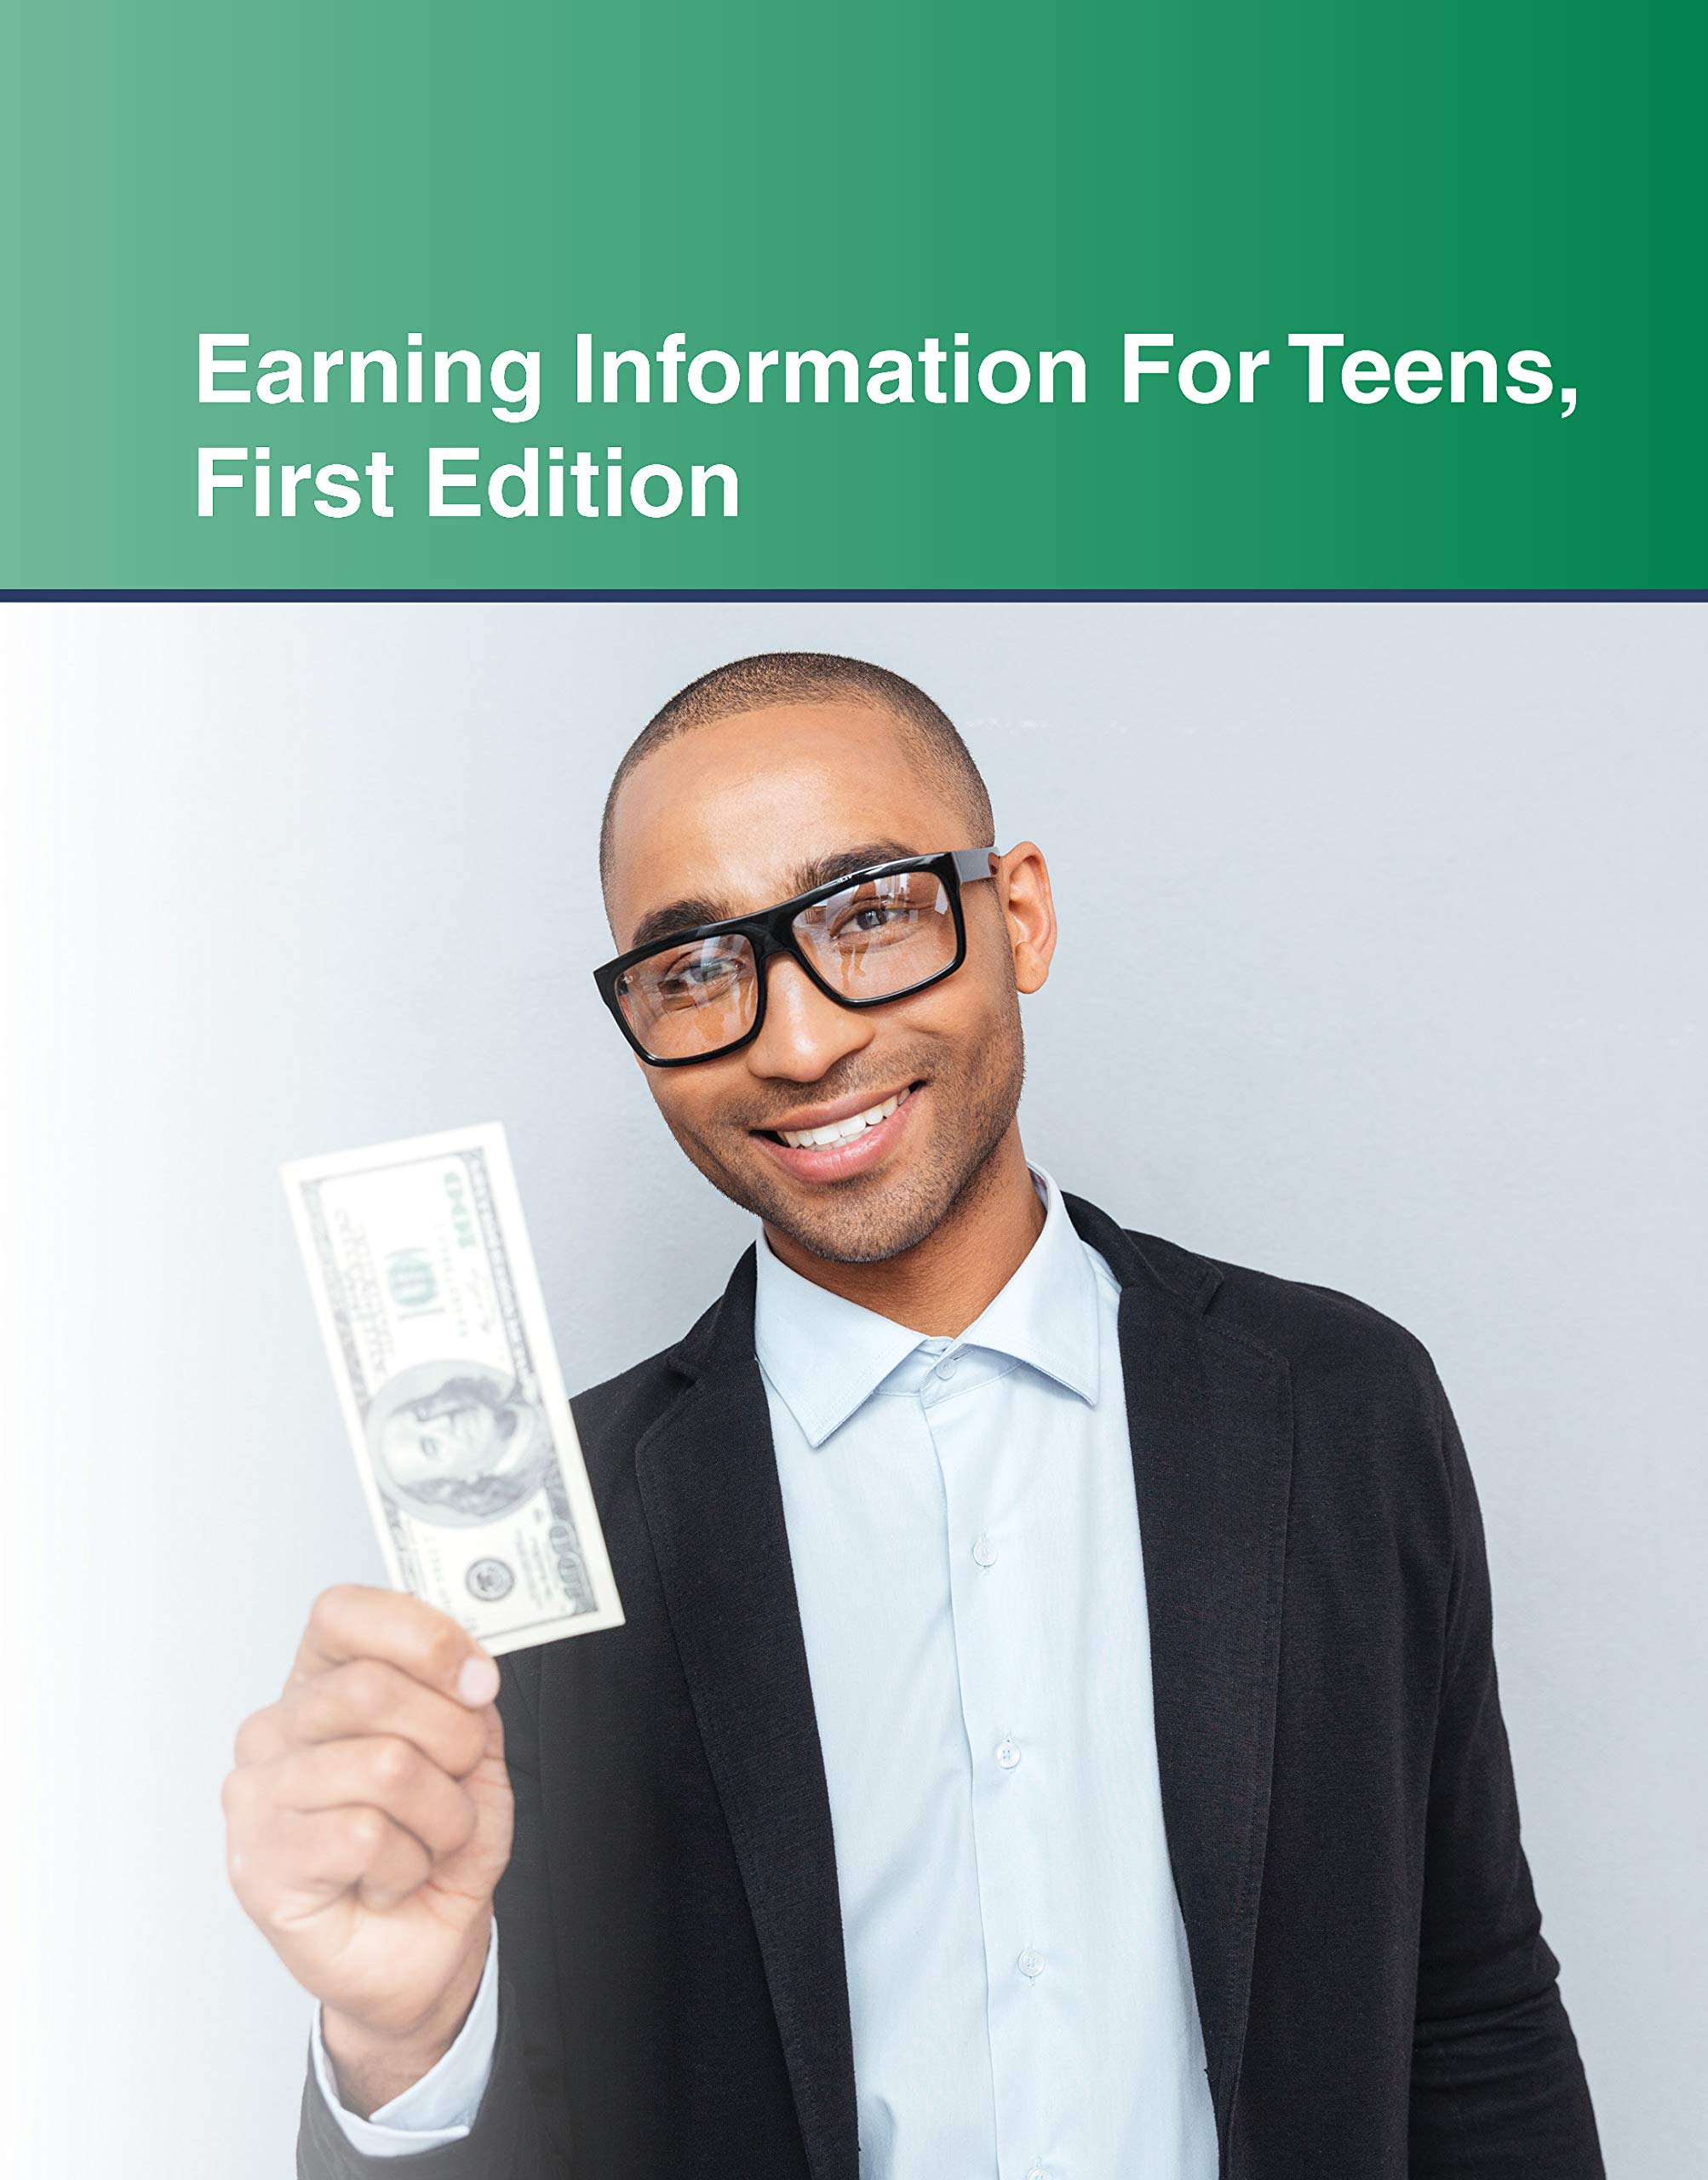 Earning Information for Teens